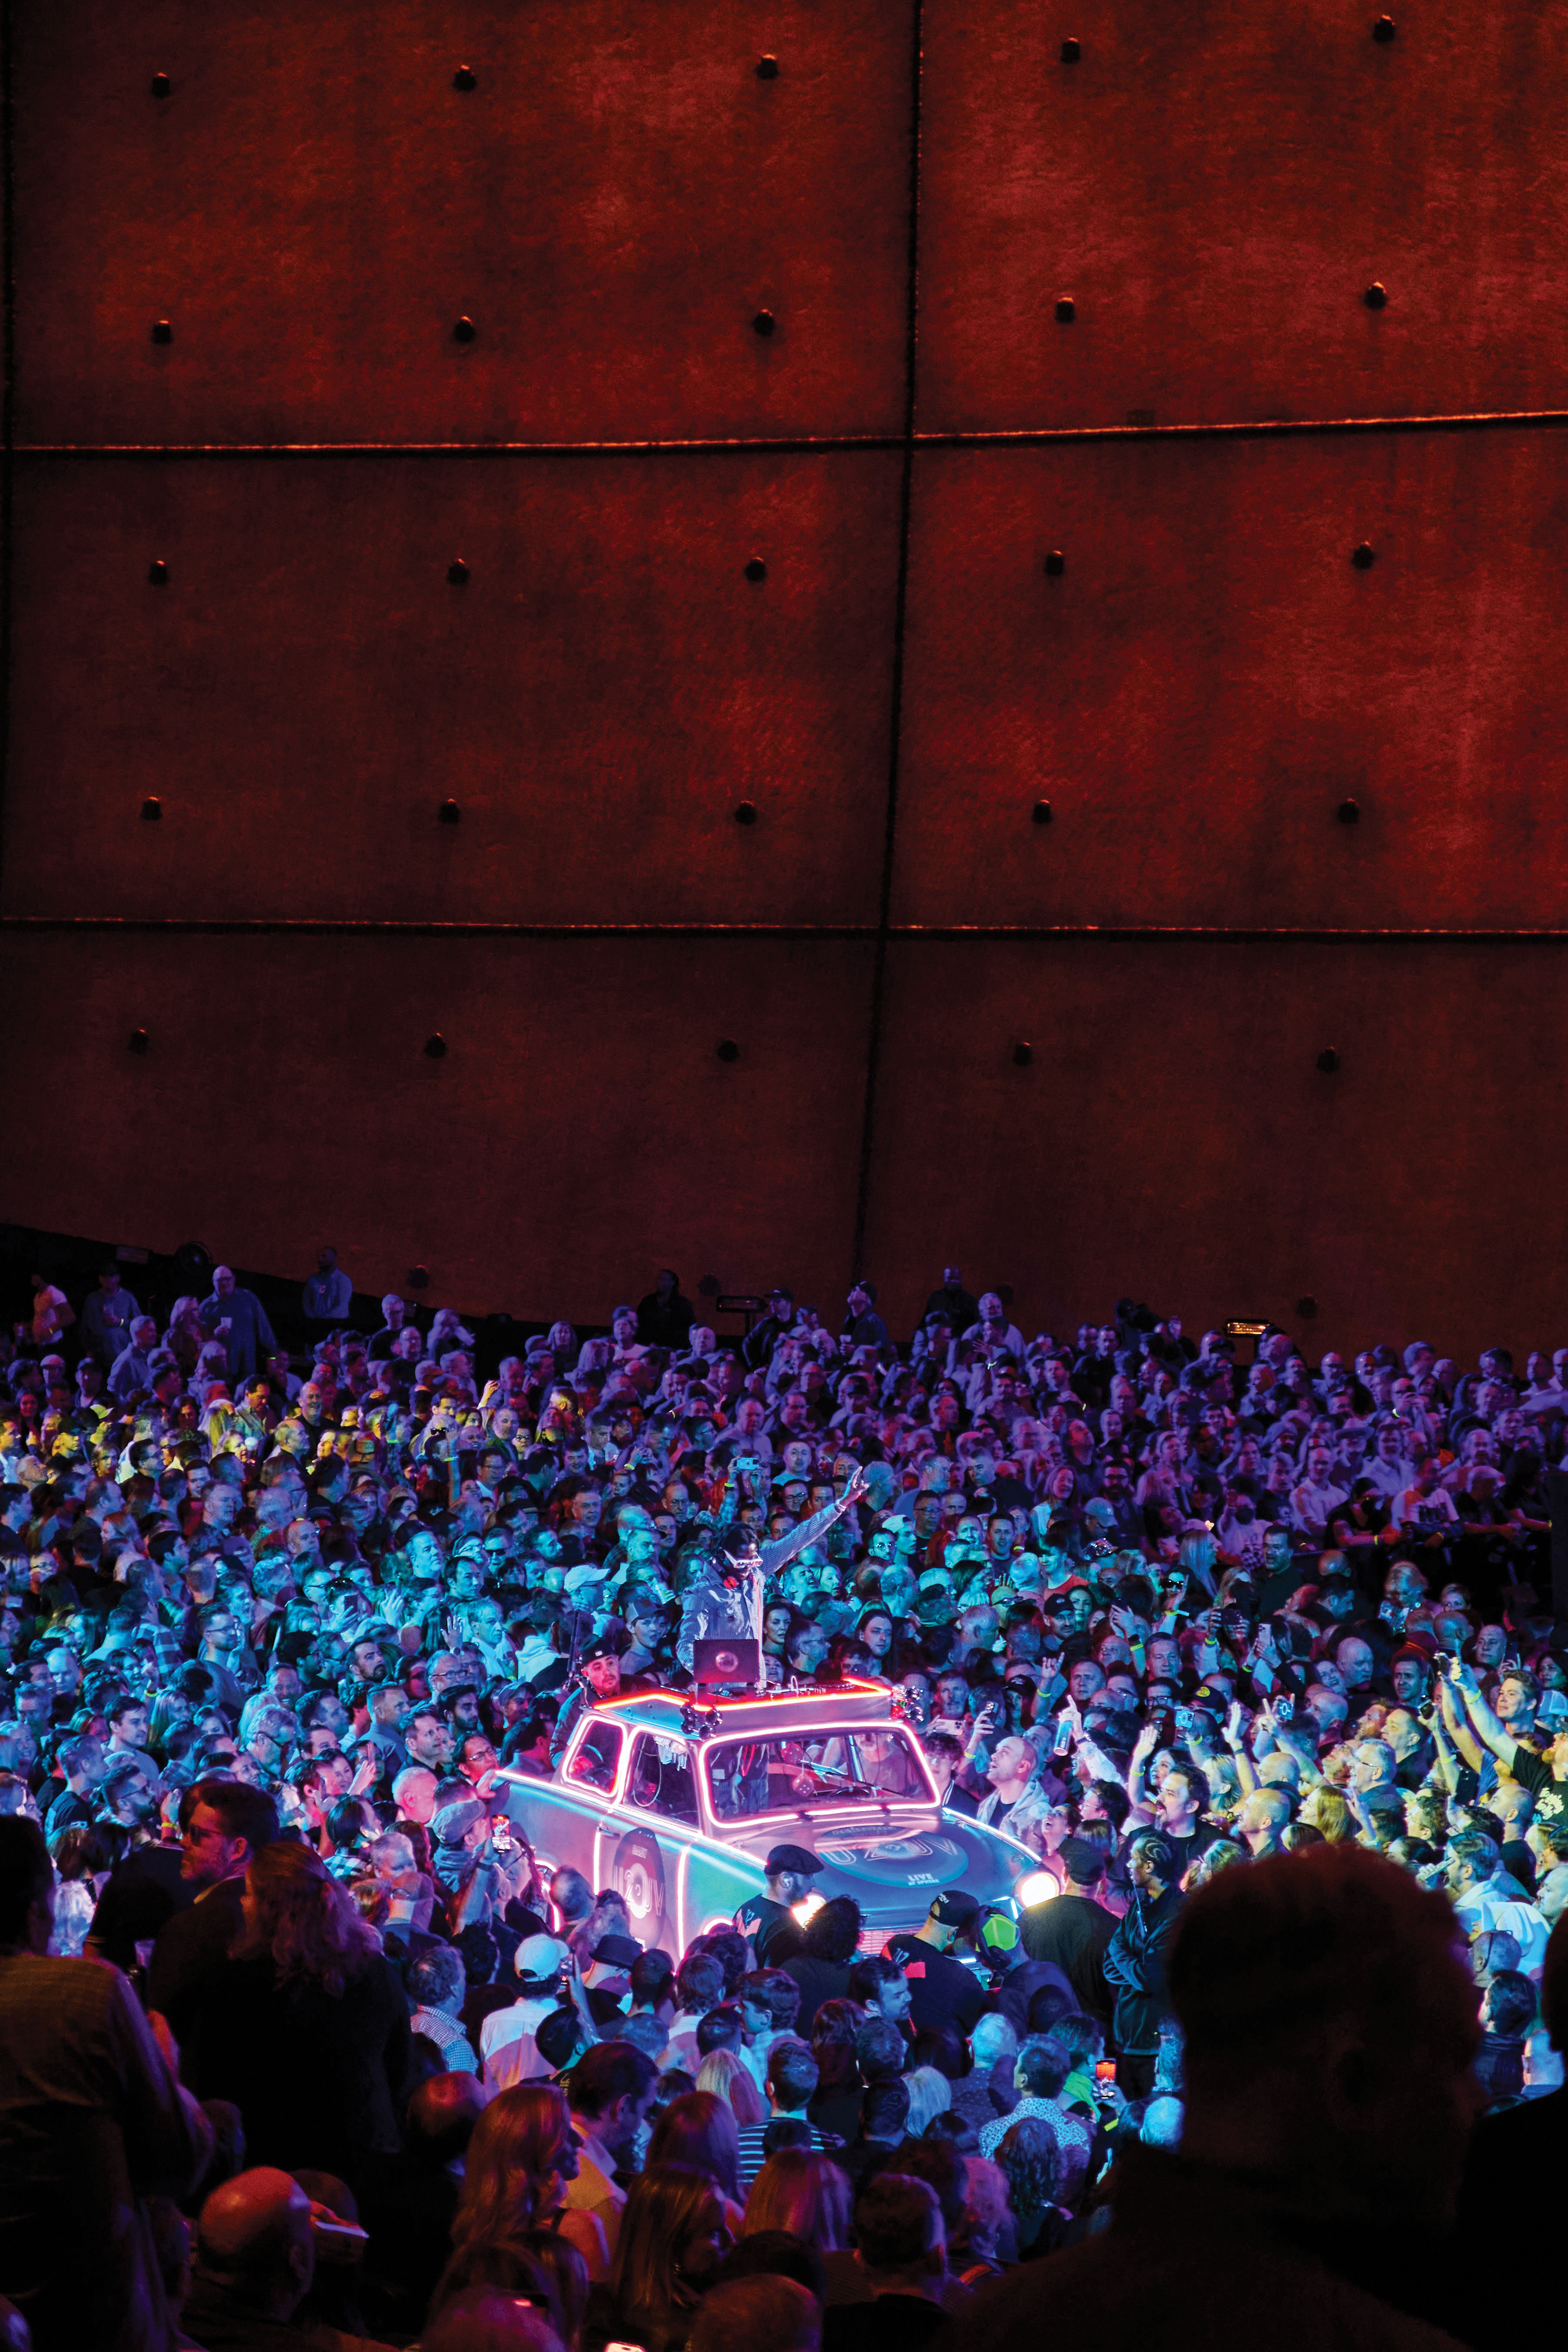 The crowd dances in the Sphere to music spun by Pauli “the PSM” Lovejoy during a U2 pre-show.